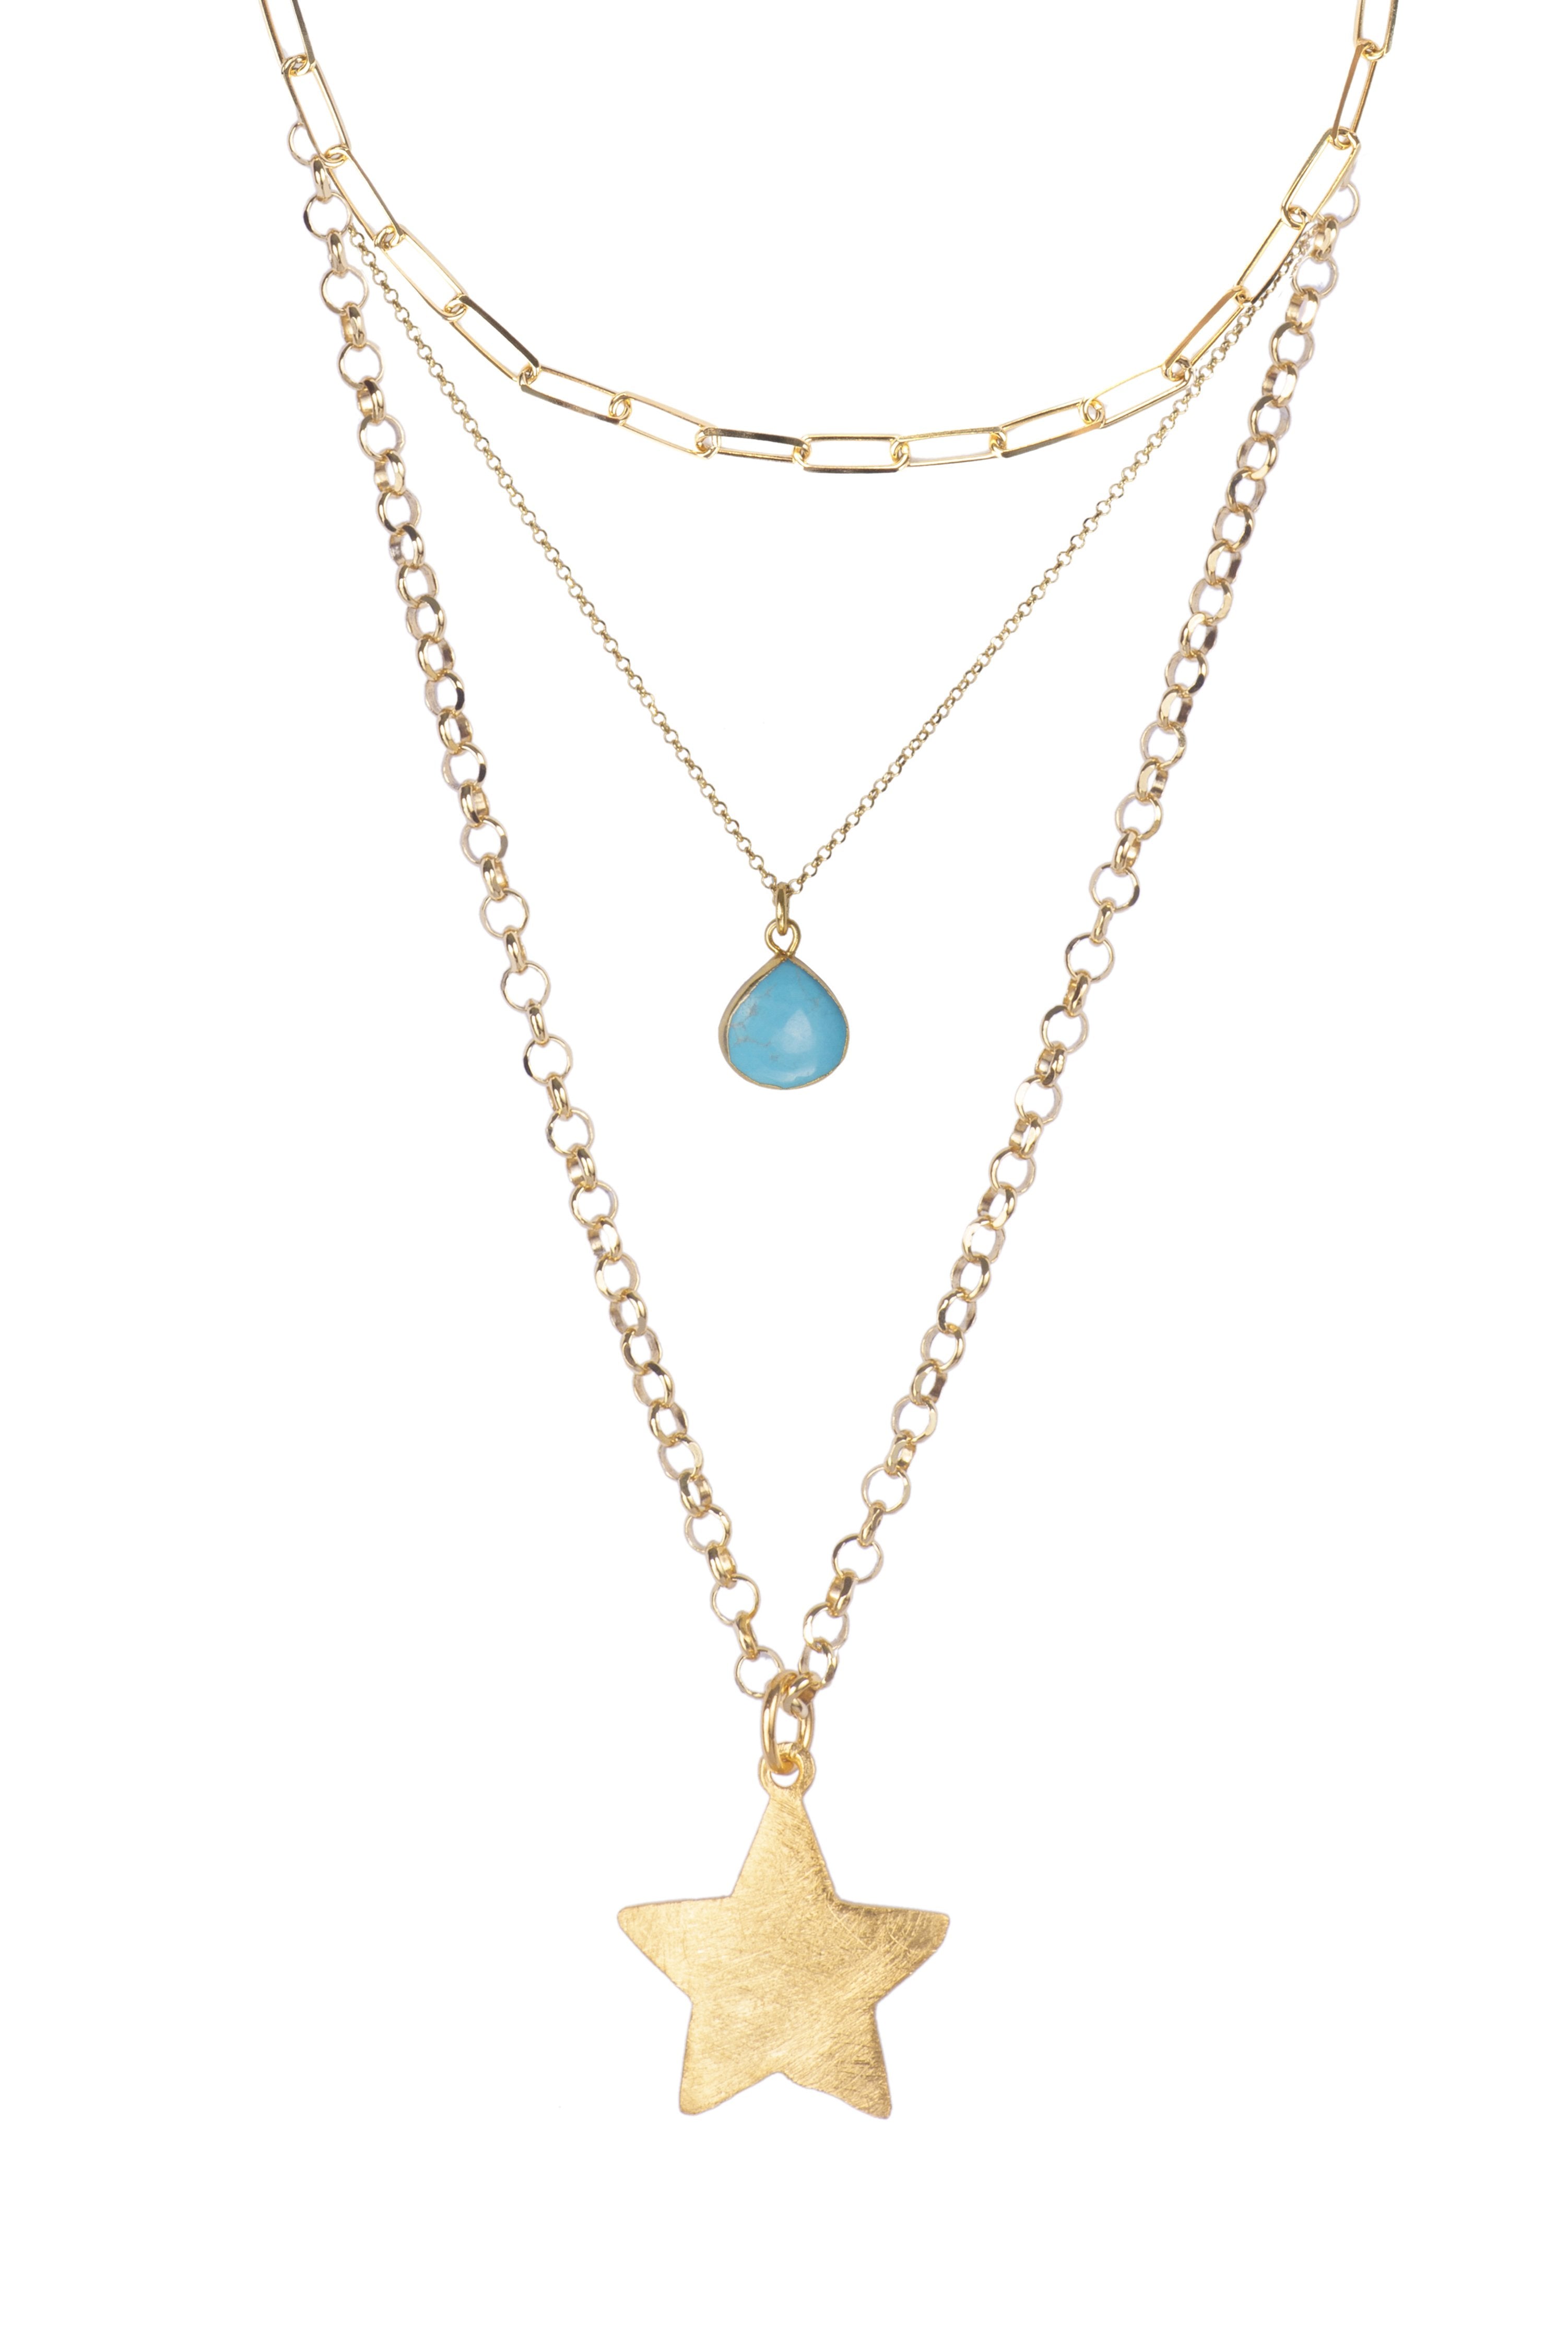 PAPERCLIP + TURQUOISE HOWLITE + STAR NECKLACE || SET